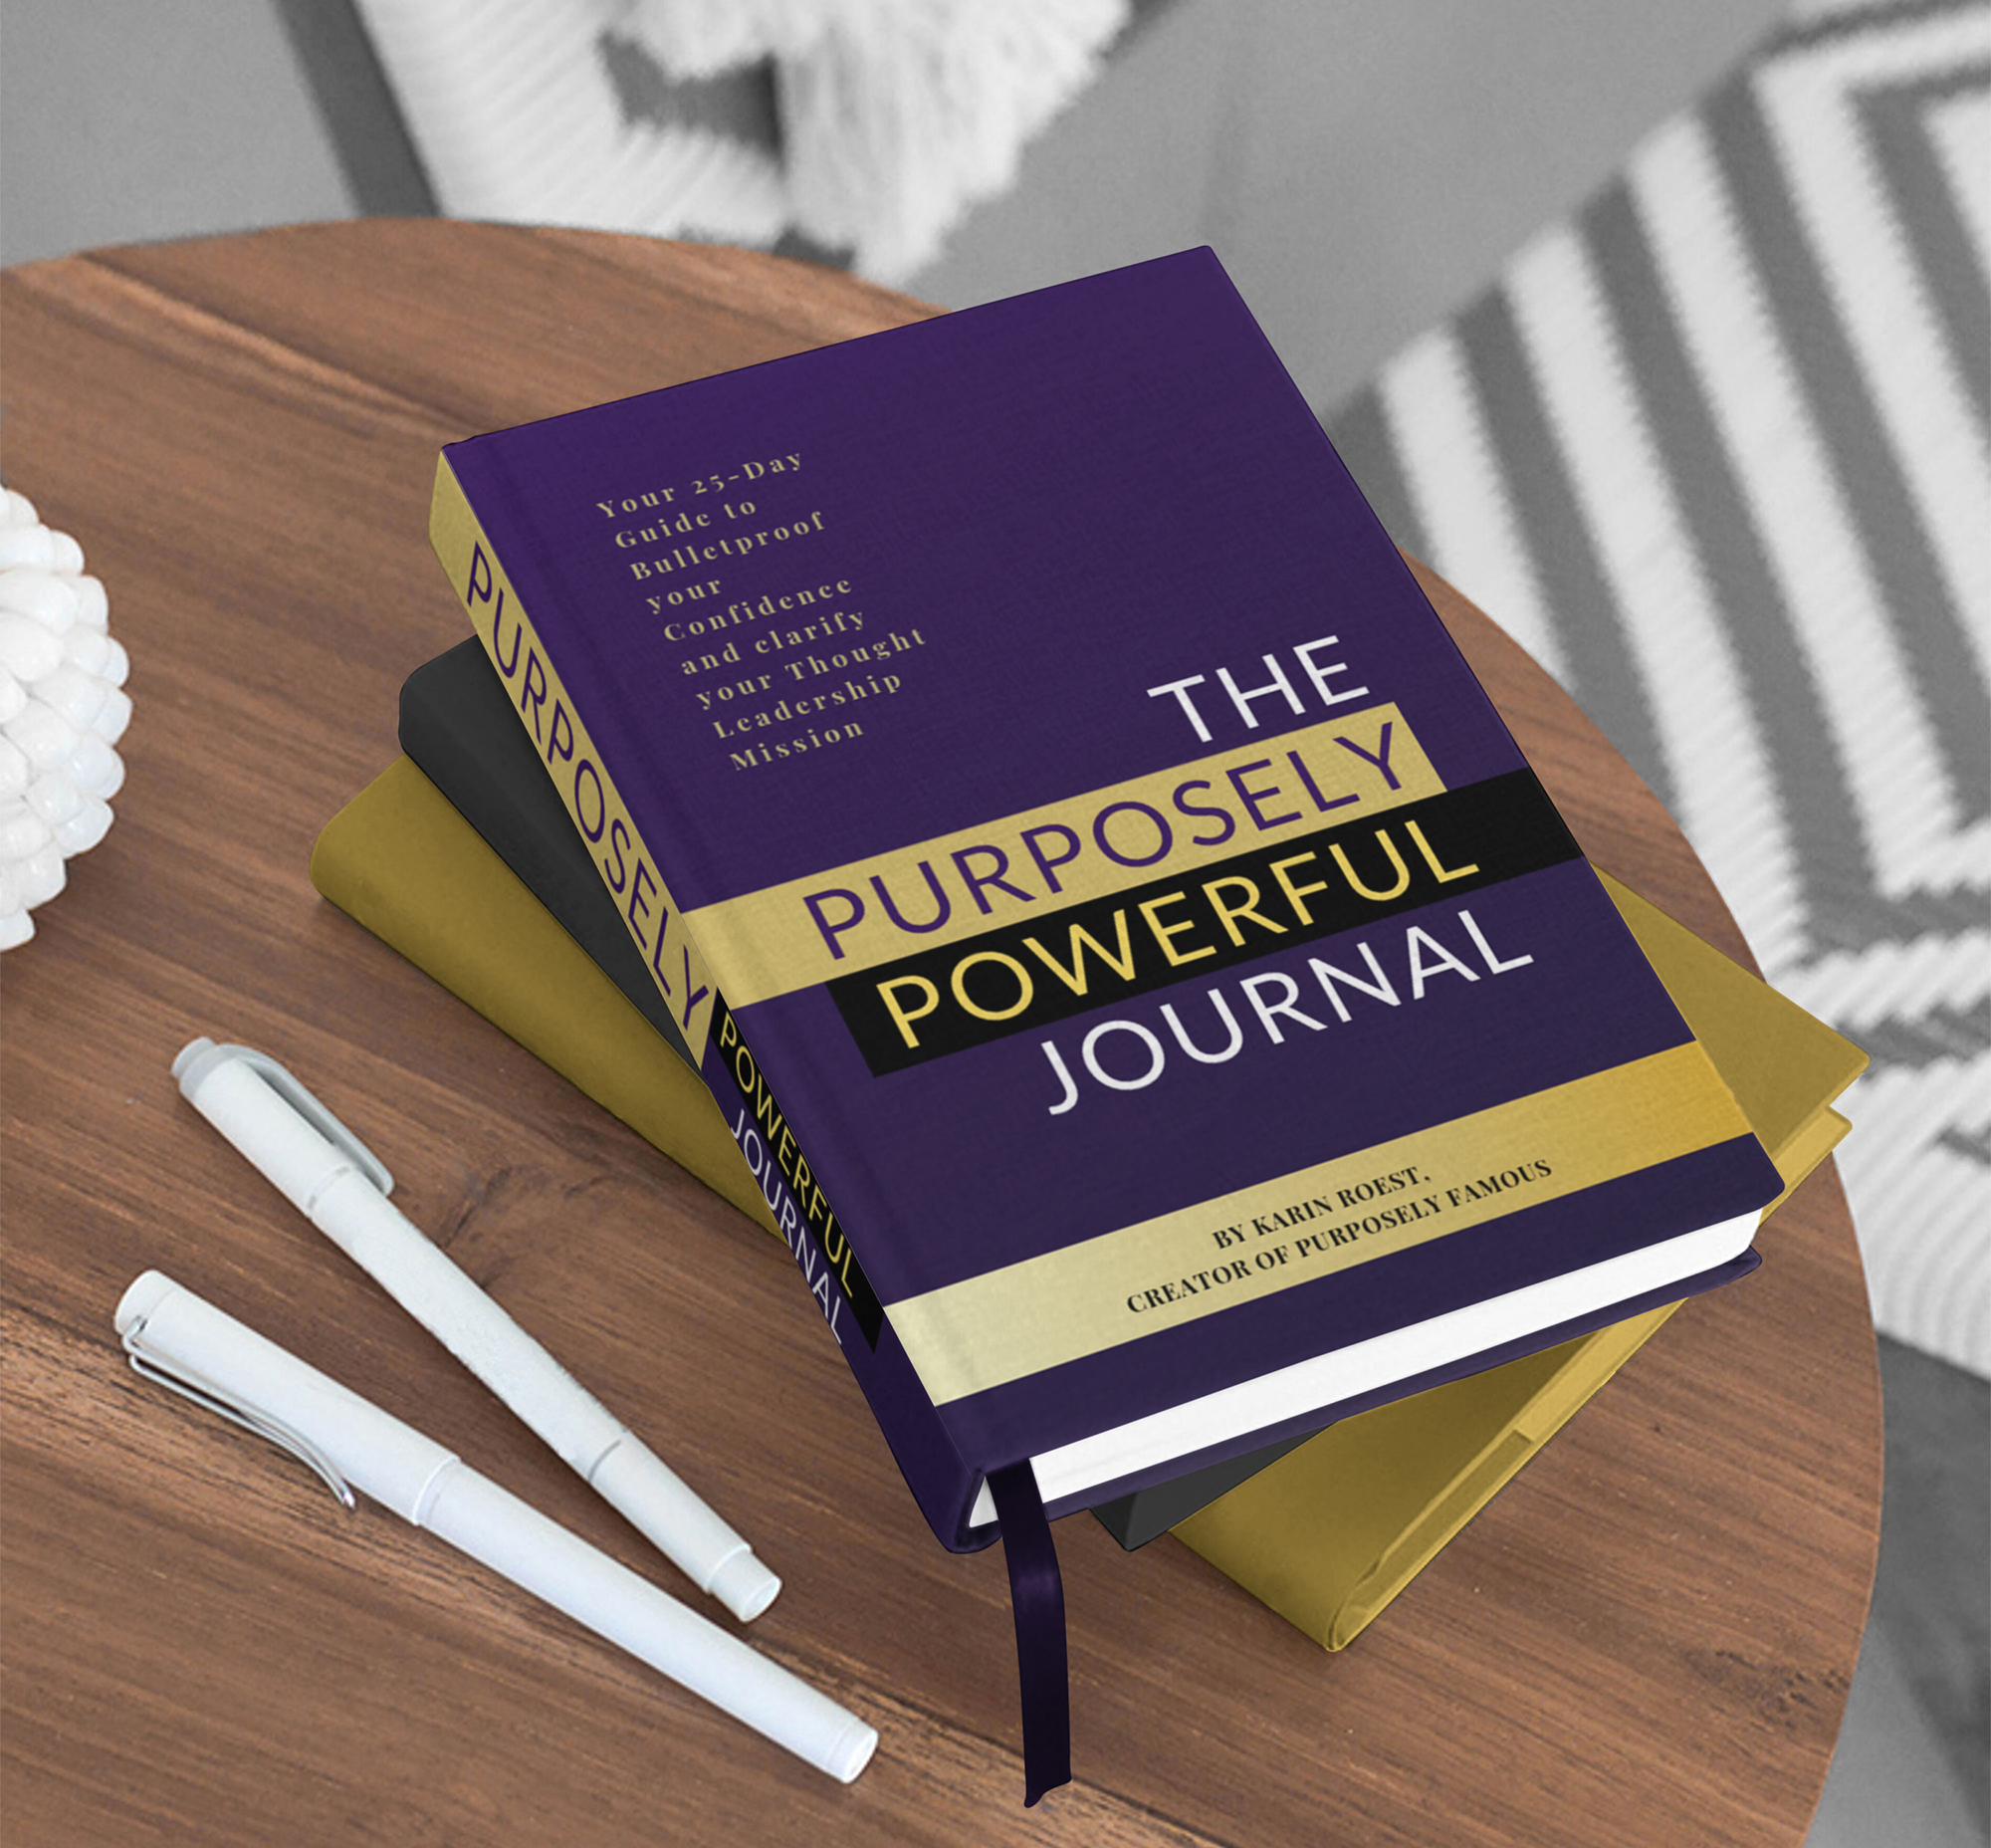 Purposely powerful Journal